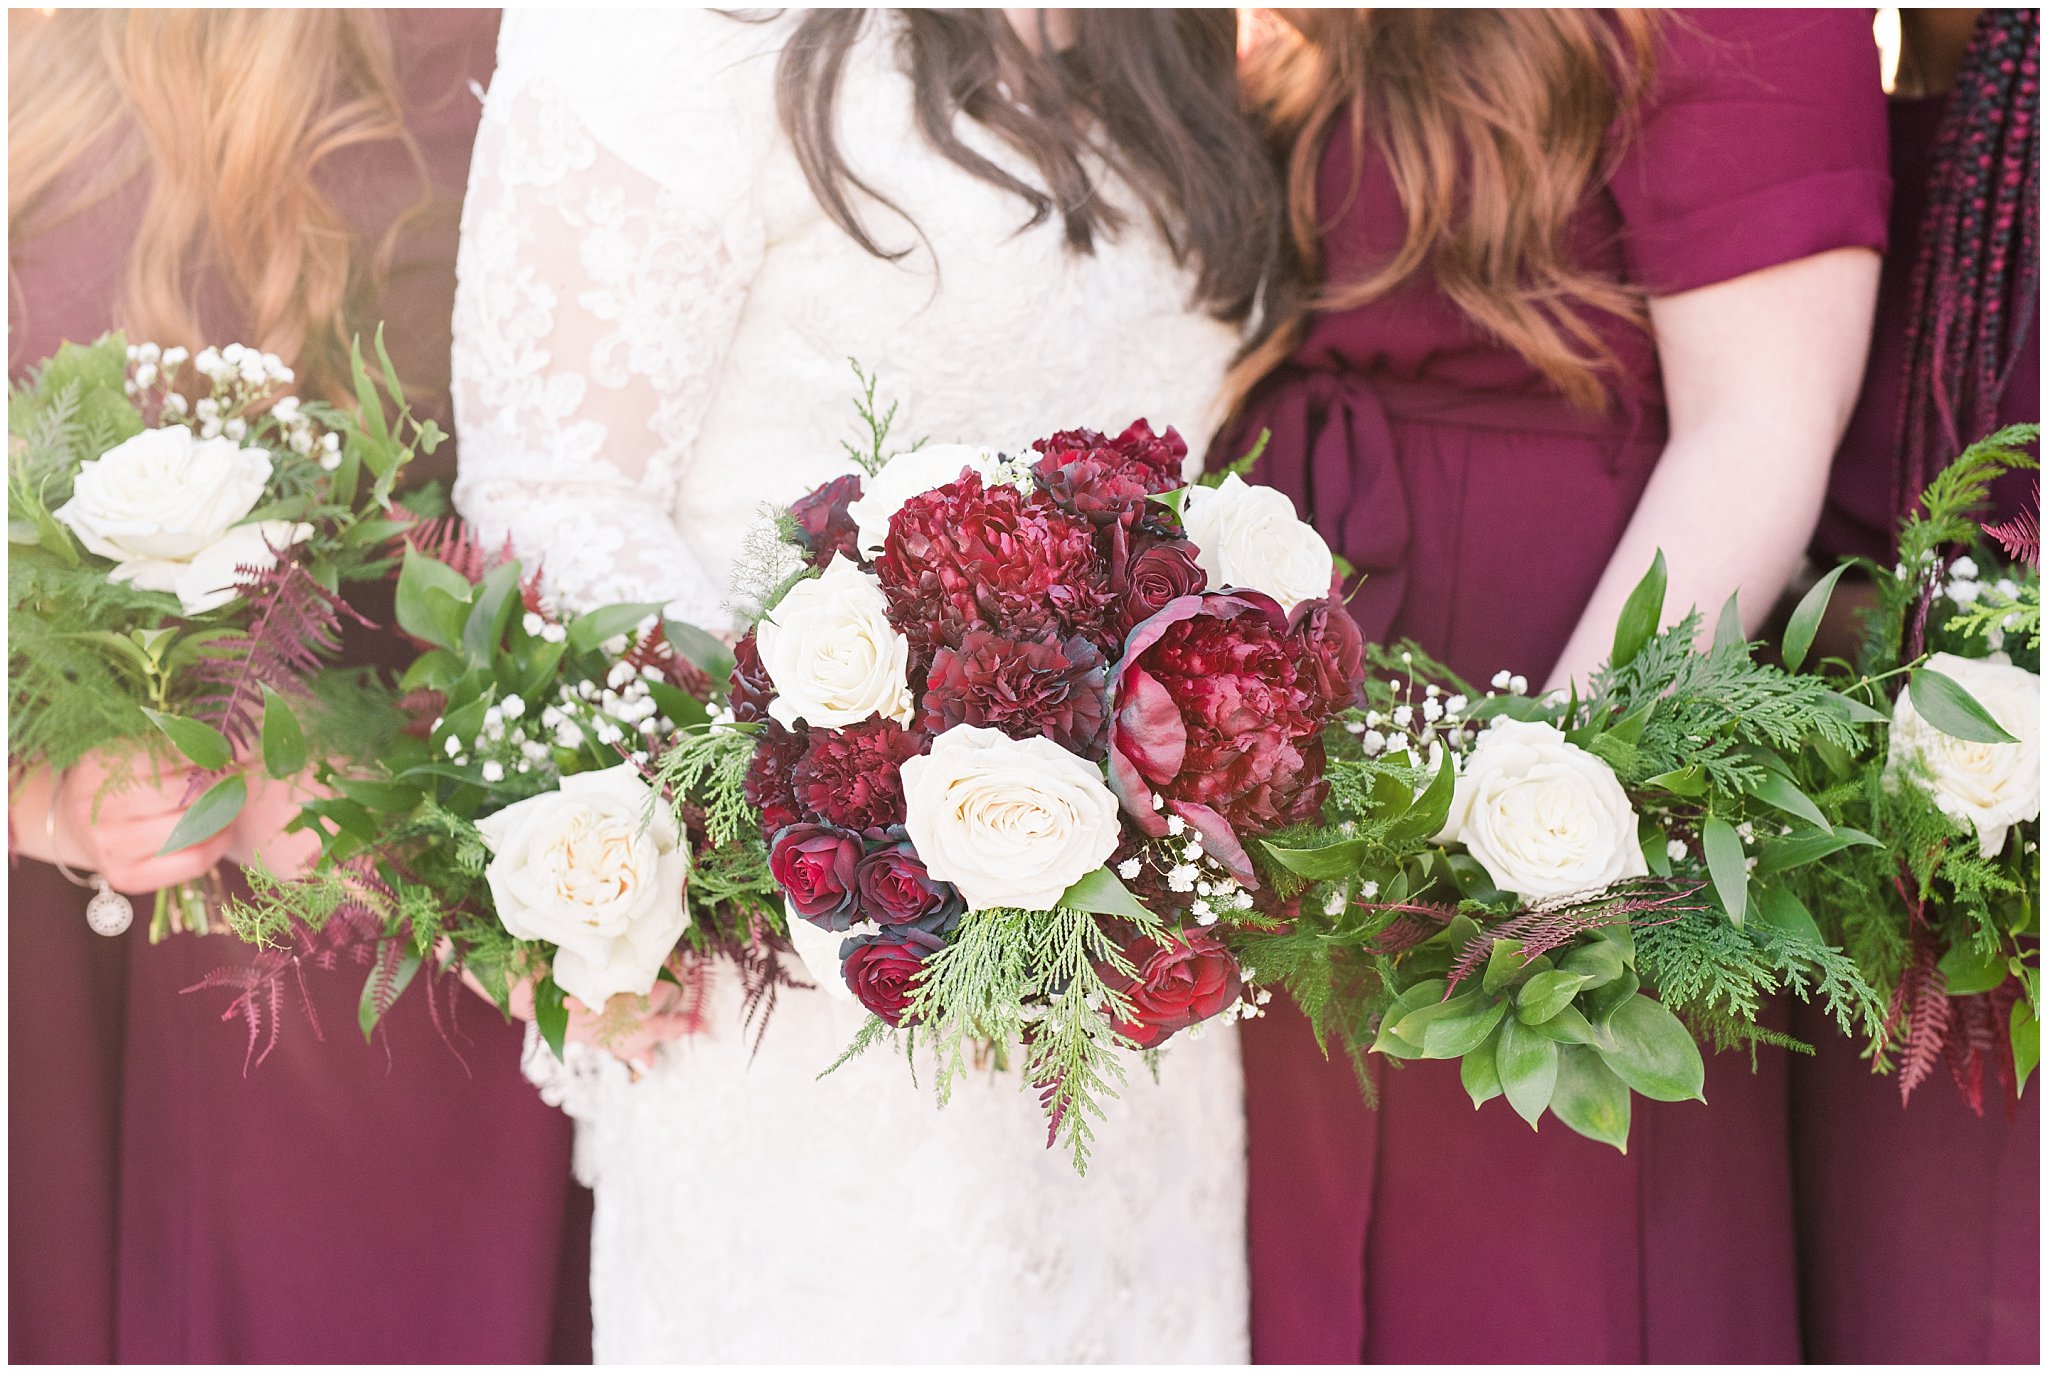 Bridesmaids portraits in burgundy and black at the Oquirrh Mountain Temple | Oquirrh Mountain Temple and Gardner Village Wedding | The Gathering Place | Jessie and Dallin Photography